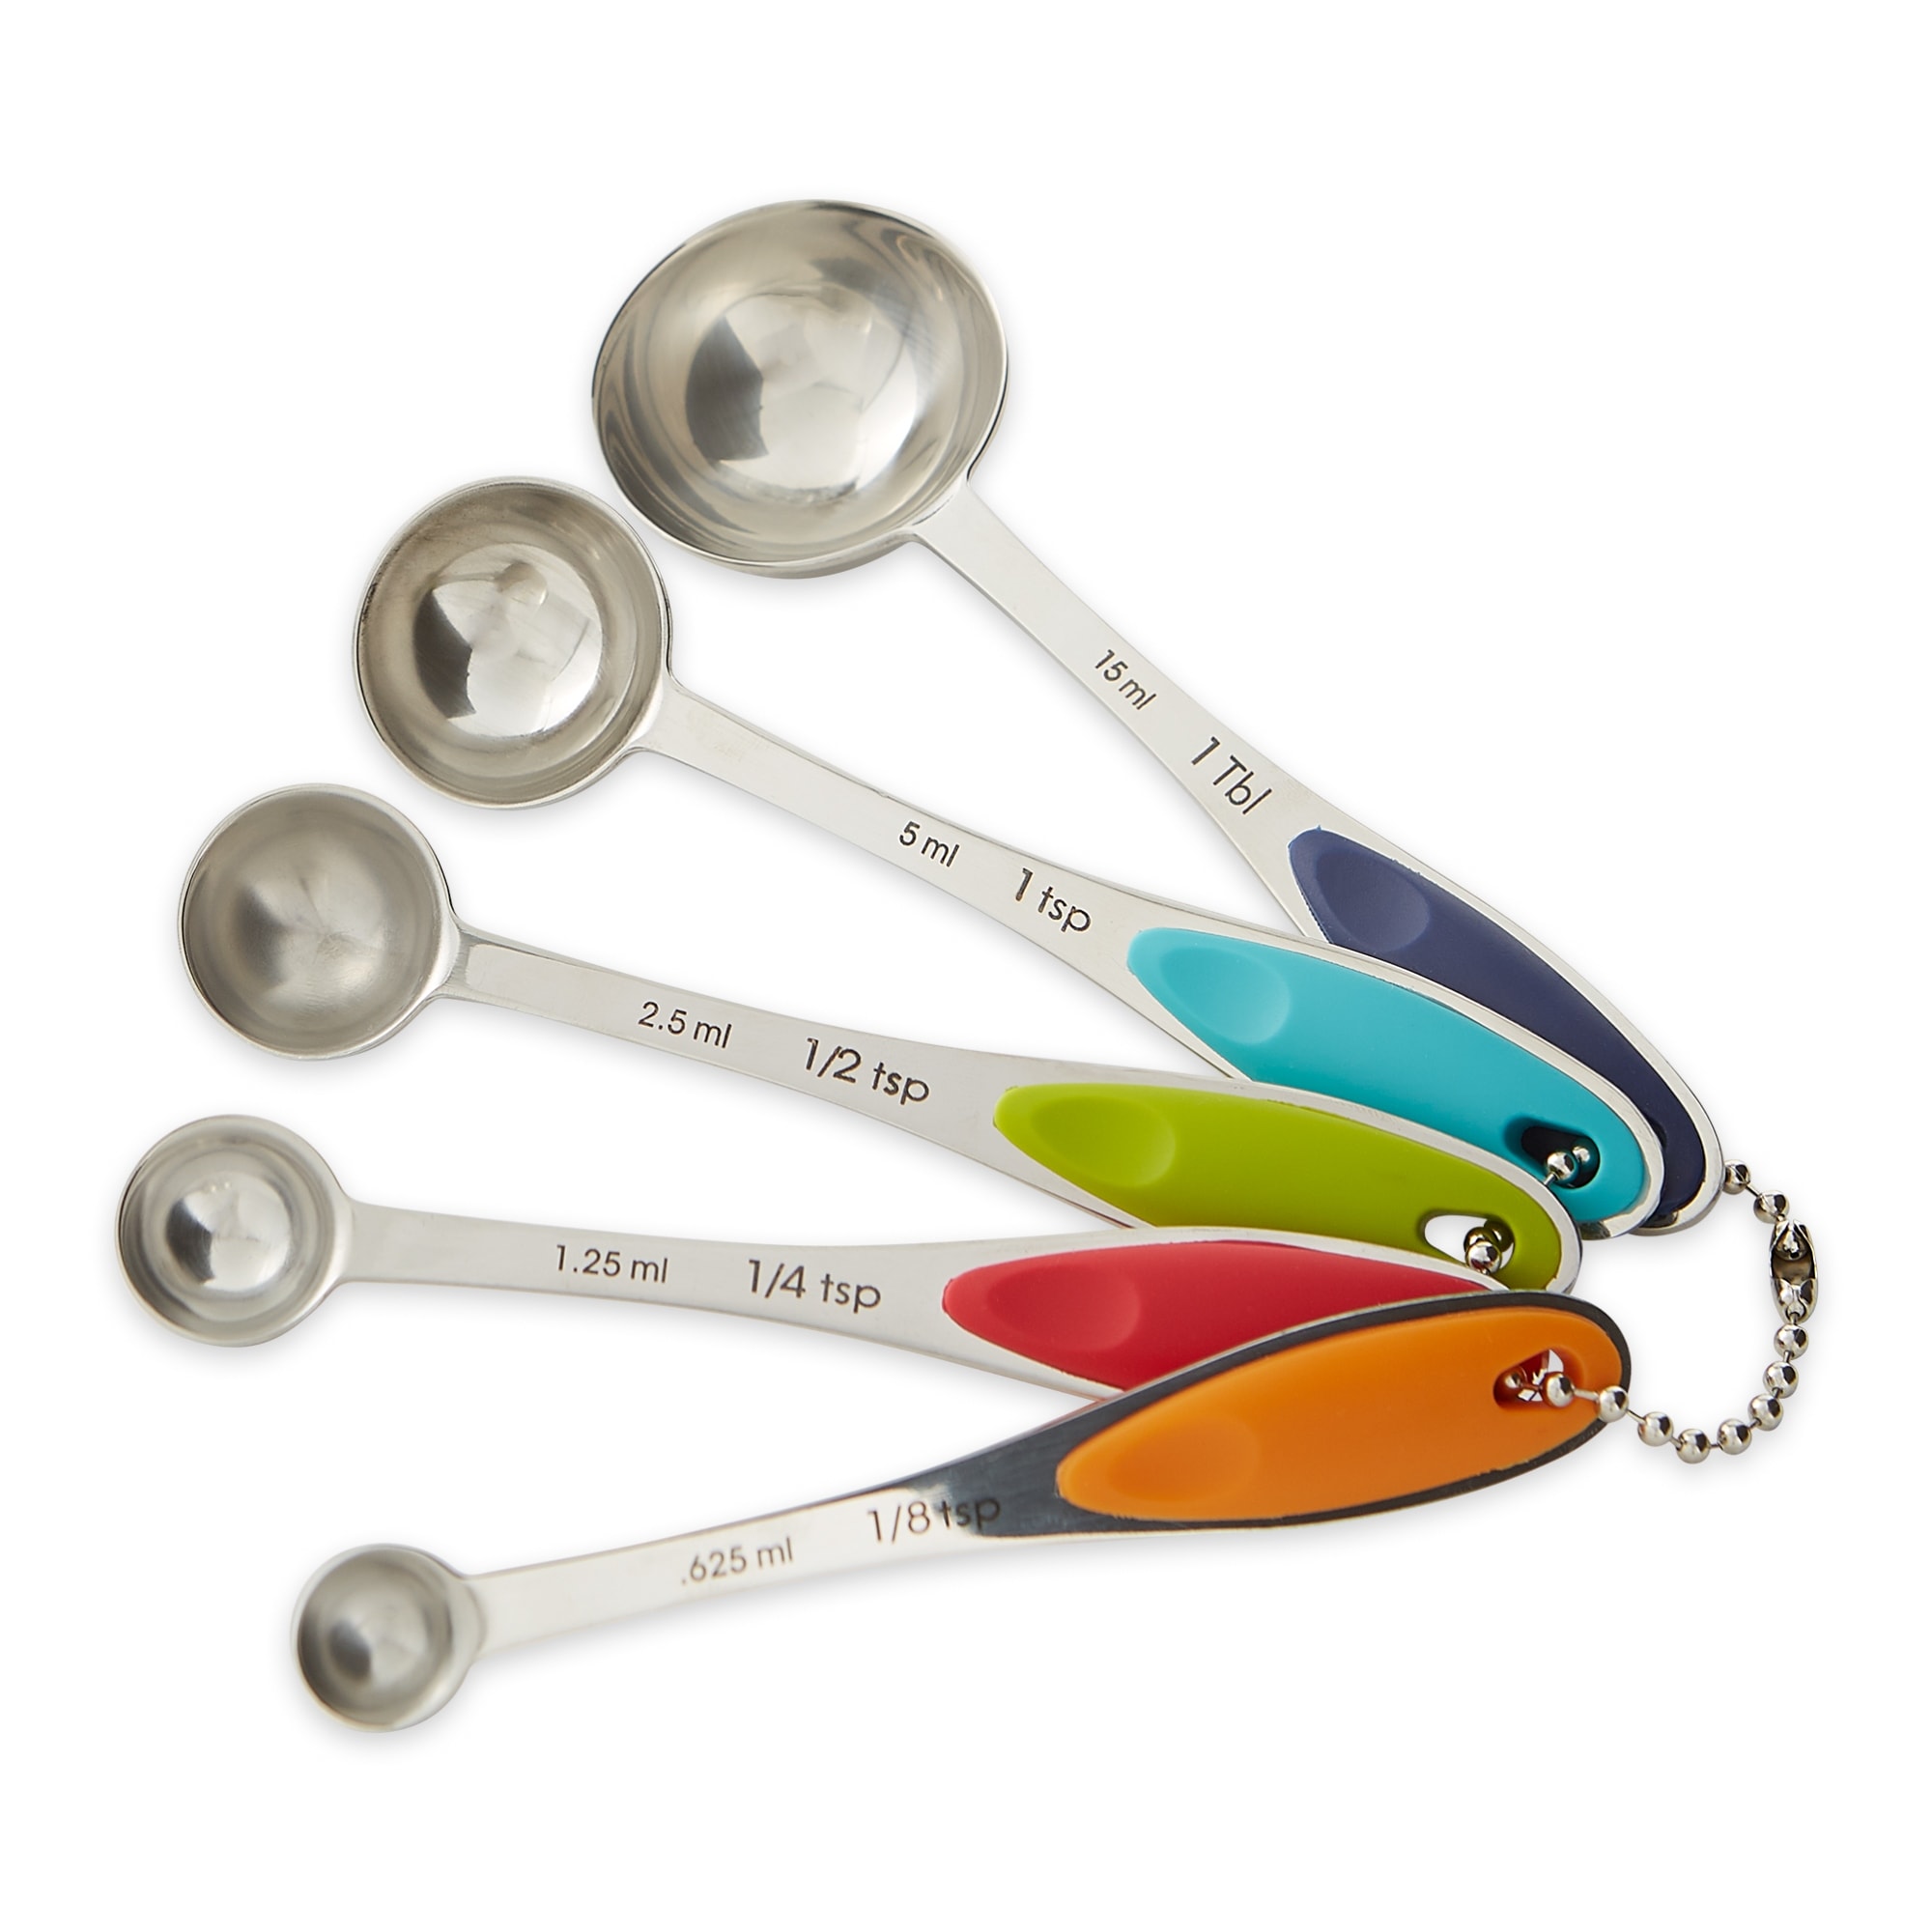 https://ak1.ostkcdn.com/images/products/is/images/direct/5b72faee75d5dbee7dbf8e959e5dfabcb5b7a8dd/Measuring-Spoon.jpg